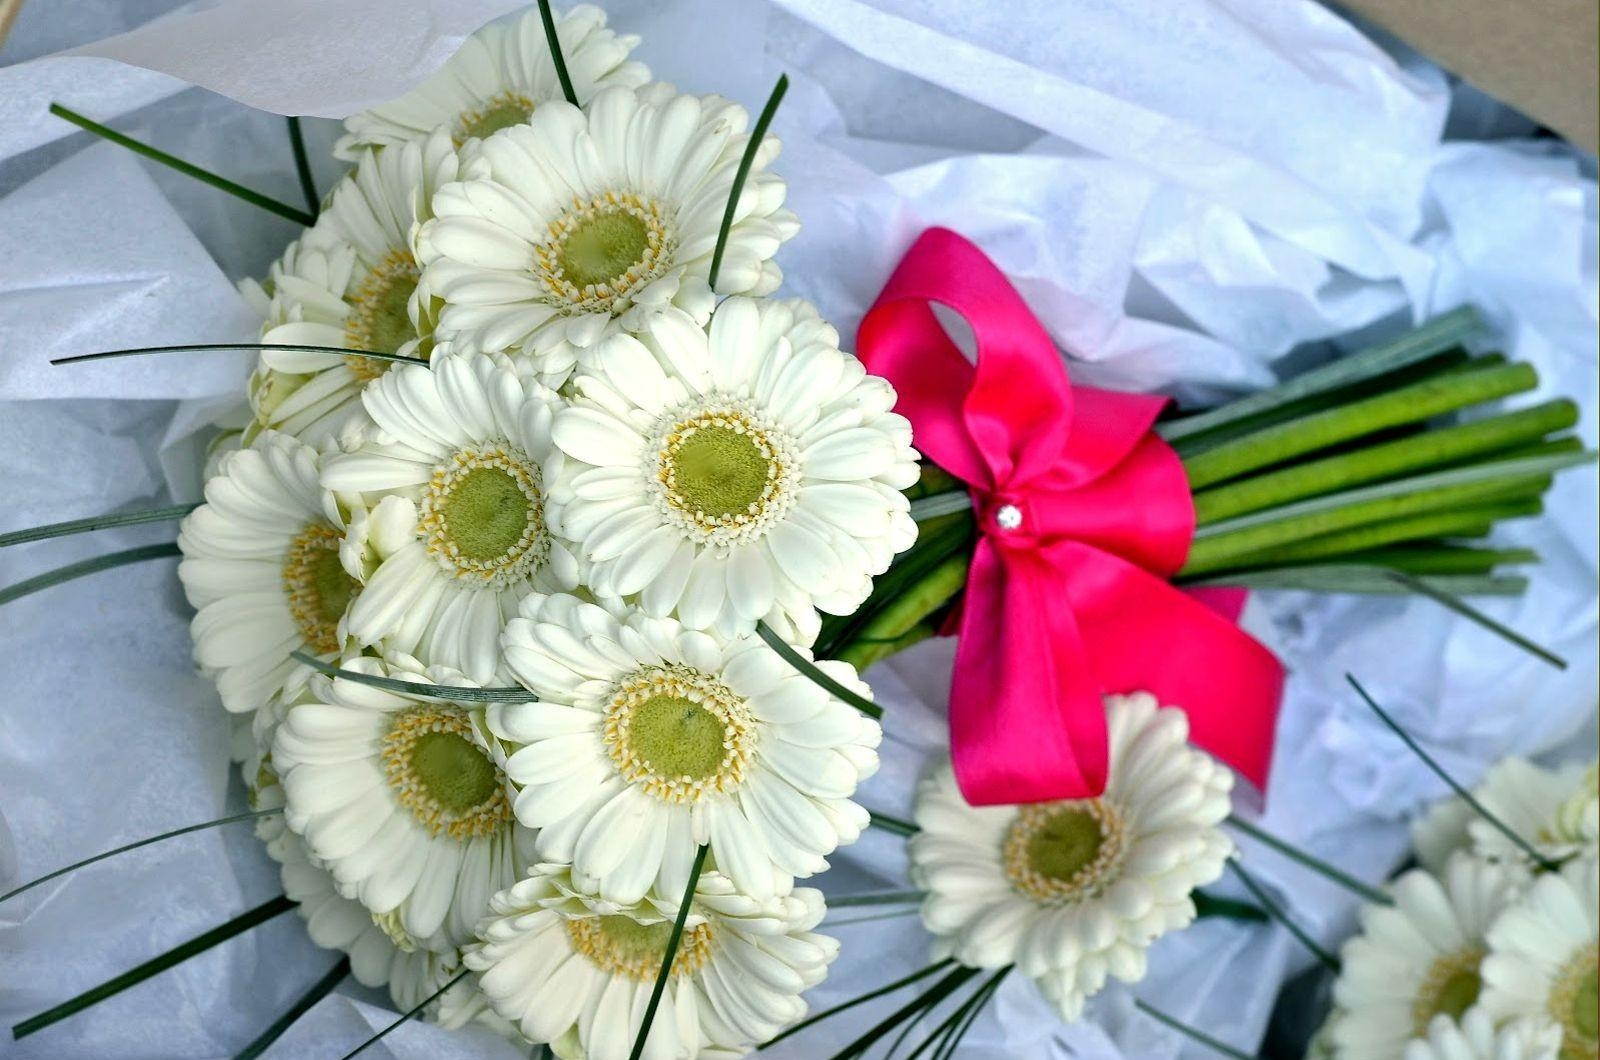 64729 download wallpaper flowers, gerberas, white, bouquet, bow, handsomely, it's beautiful, snow white screensavers and pictures for free